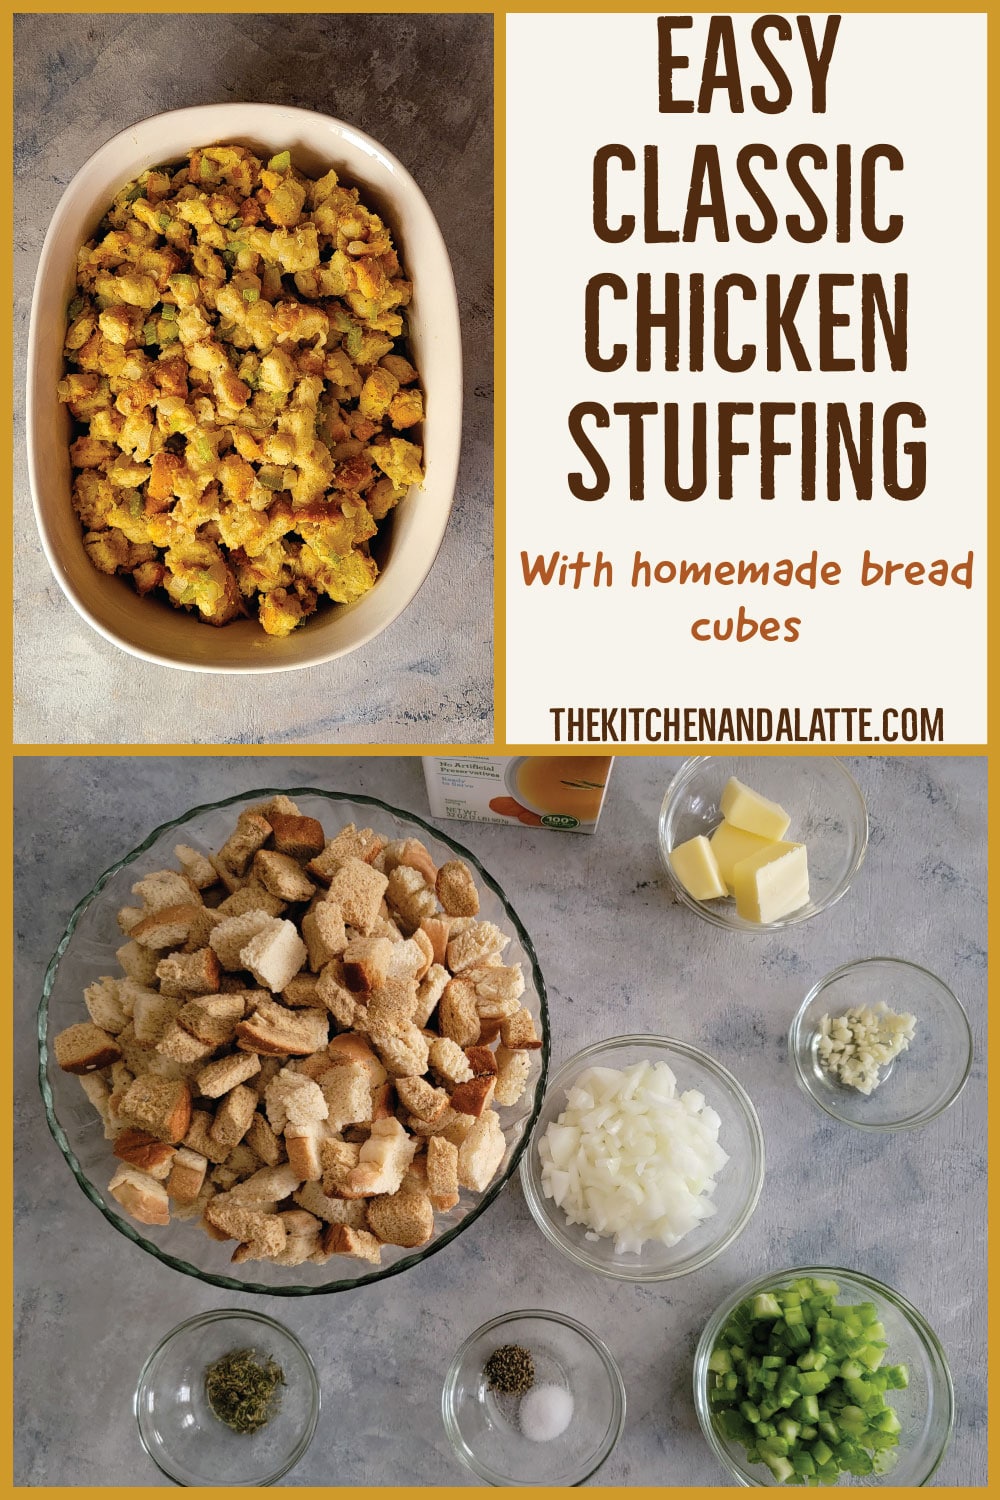 Easy classic chicken stuffing Pinterest graphic. 2 pictures, 1 is stuffing in a baking dish after cooking to be served and the other is the ingredients in prep bowls - bread cubes, rosemary, salt, pepper, onions, celery, butter, garlic and broth.